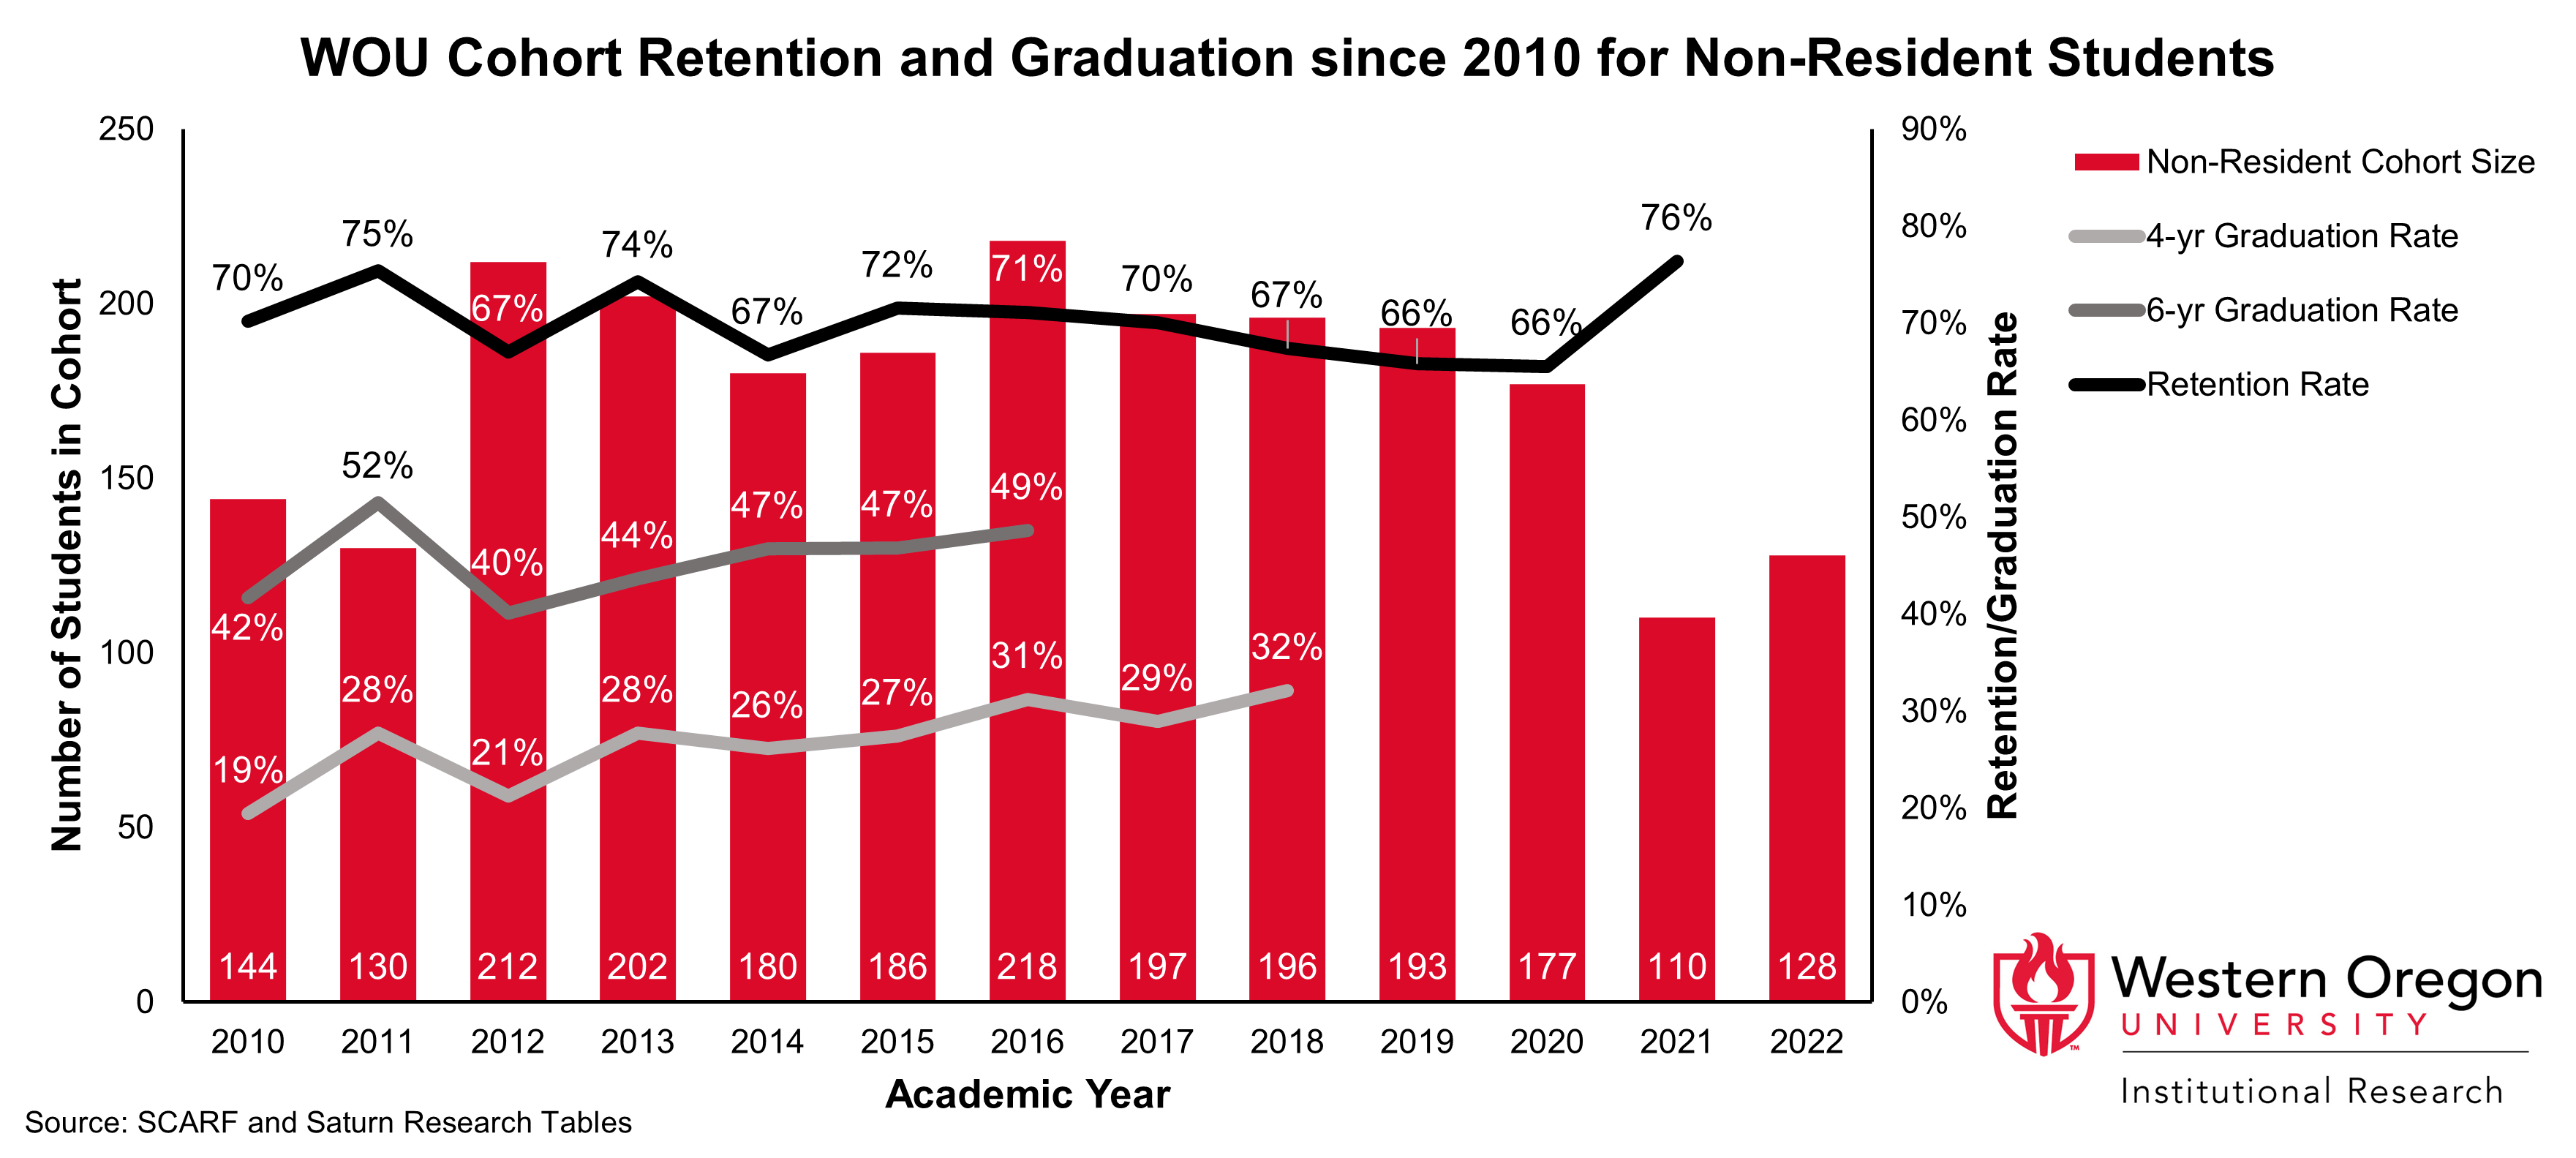 Bar and line graph of retention and 4- and 6-year graduation rates since 2010 for WOU students that have non-residency status, showing that graduation rates have been steadily increasing while retention rates have remained largely stable